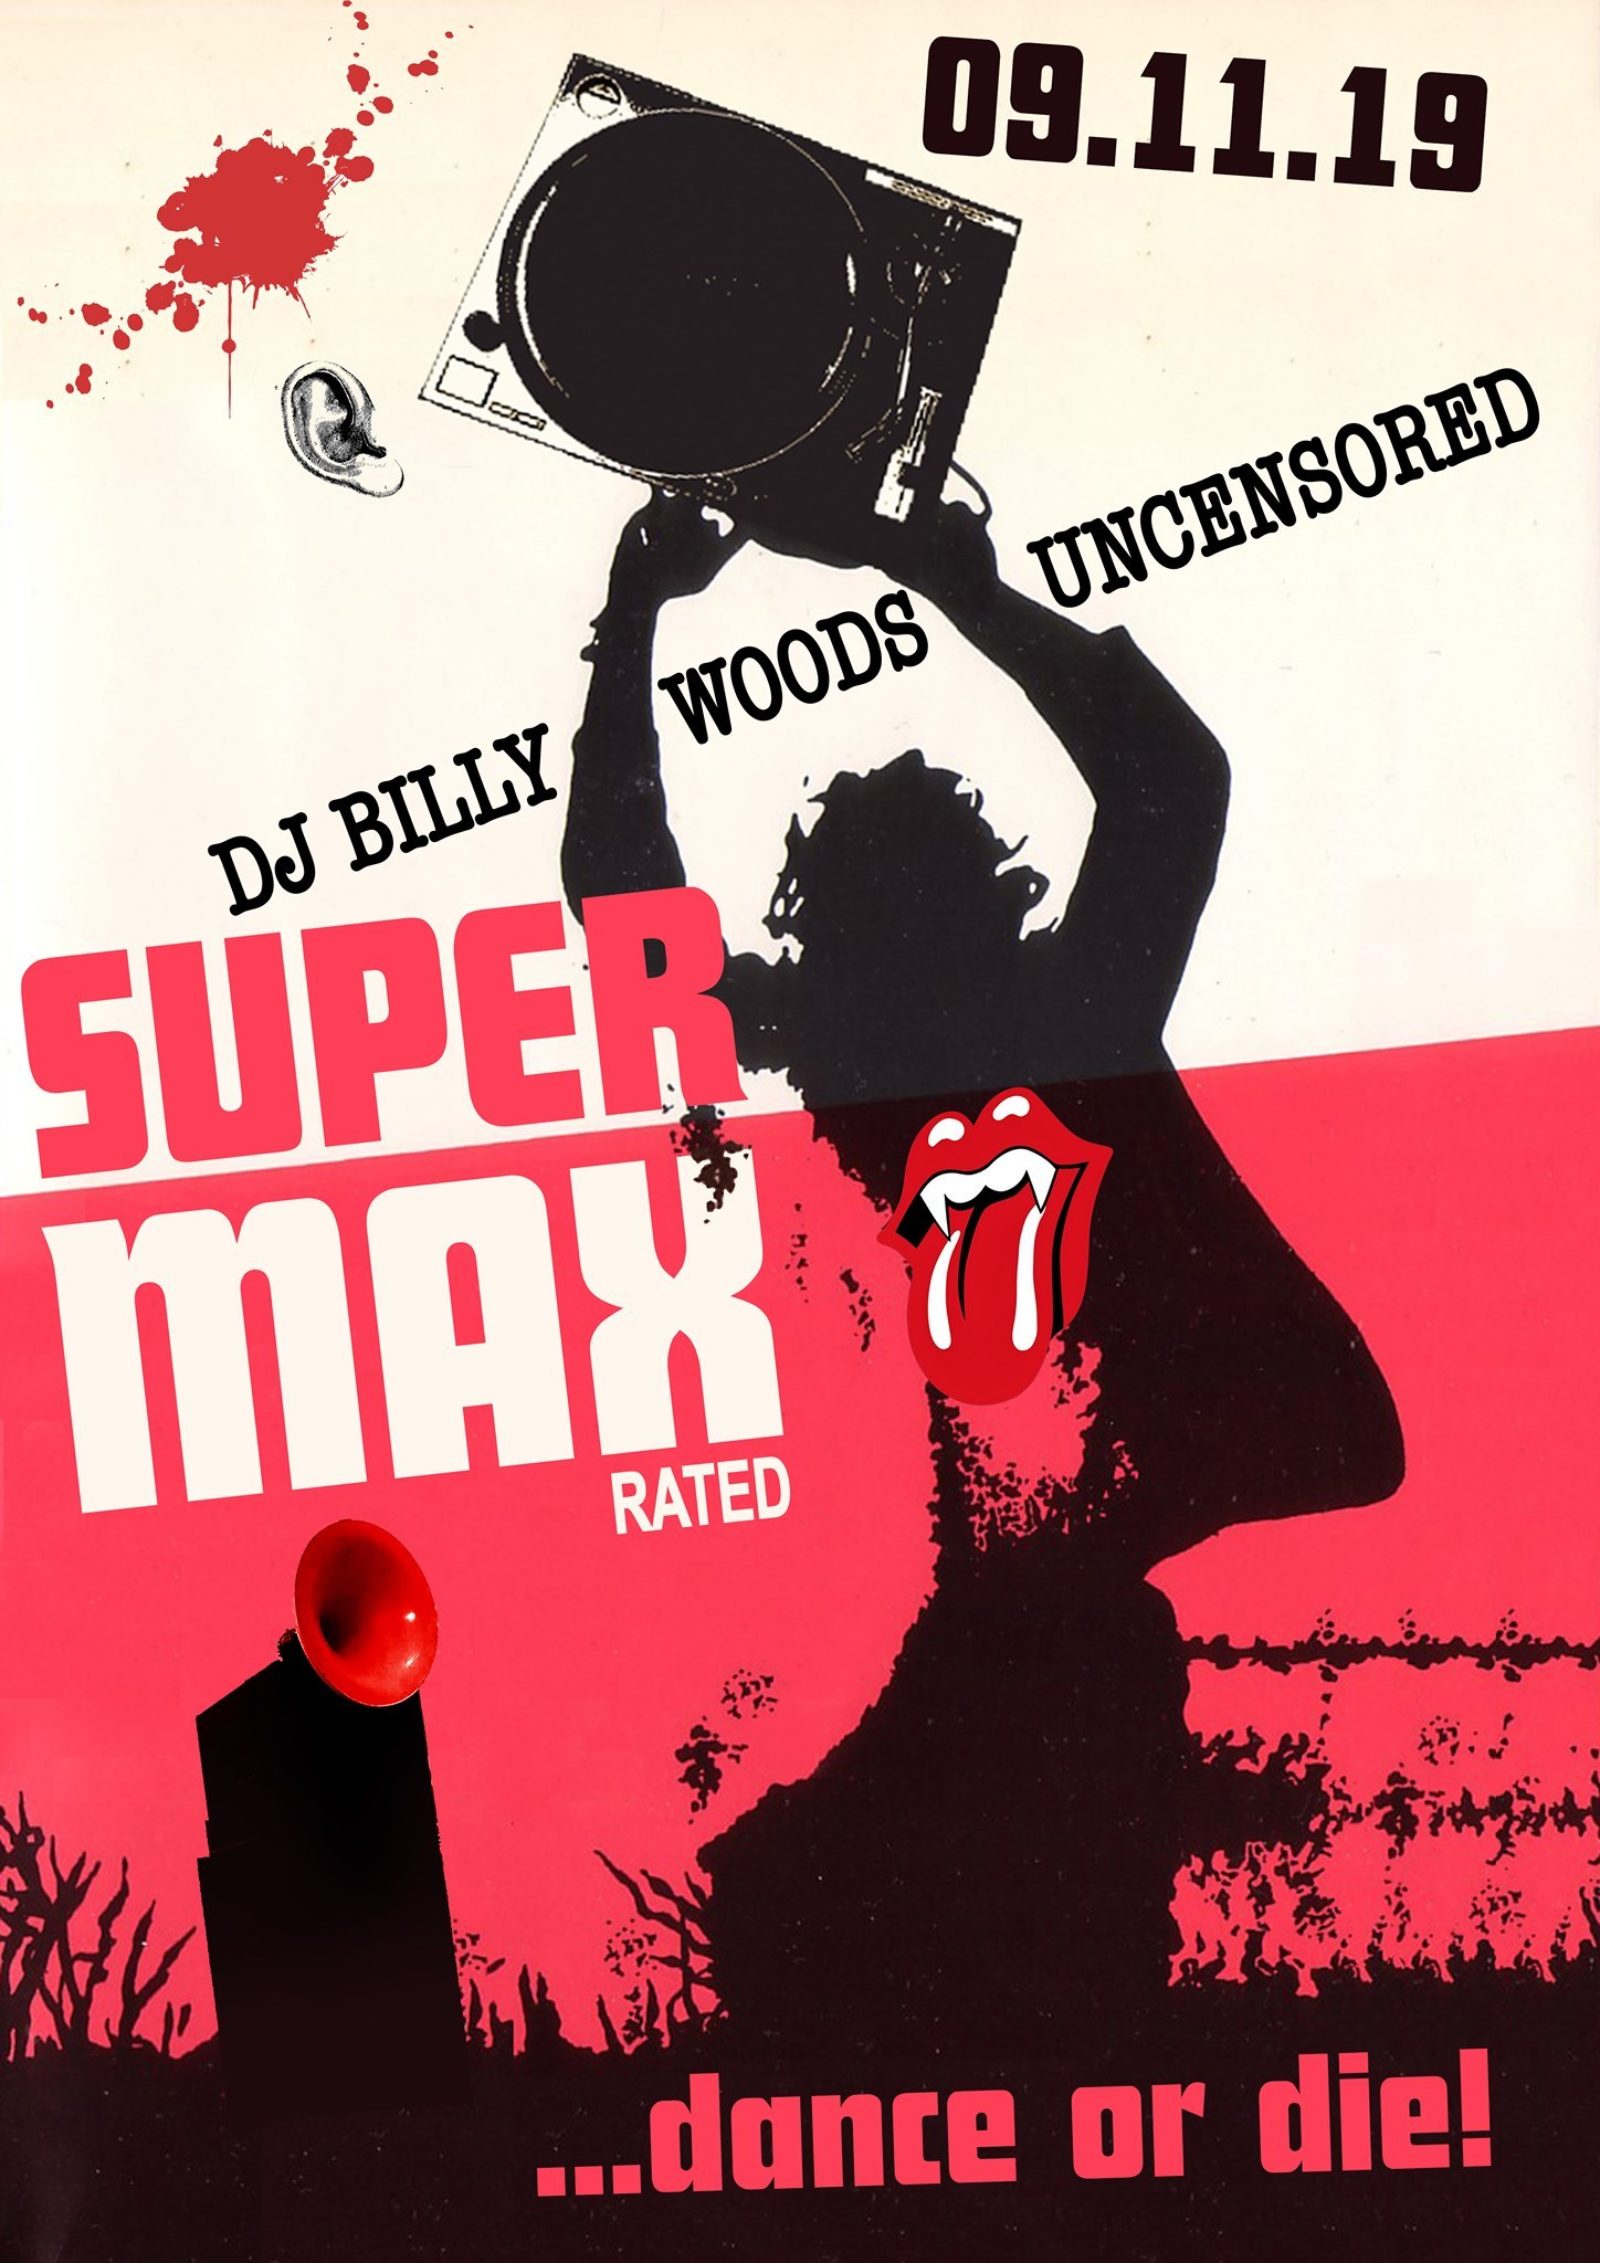 SUPERMAX with DJ BILLY WOODS